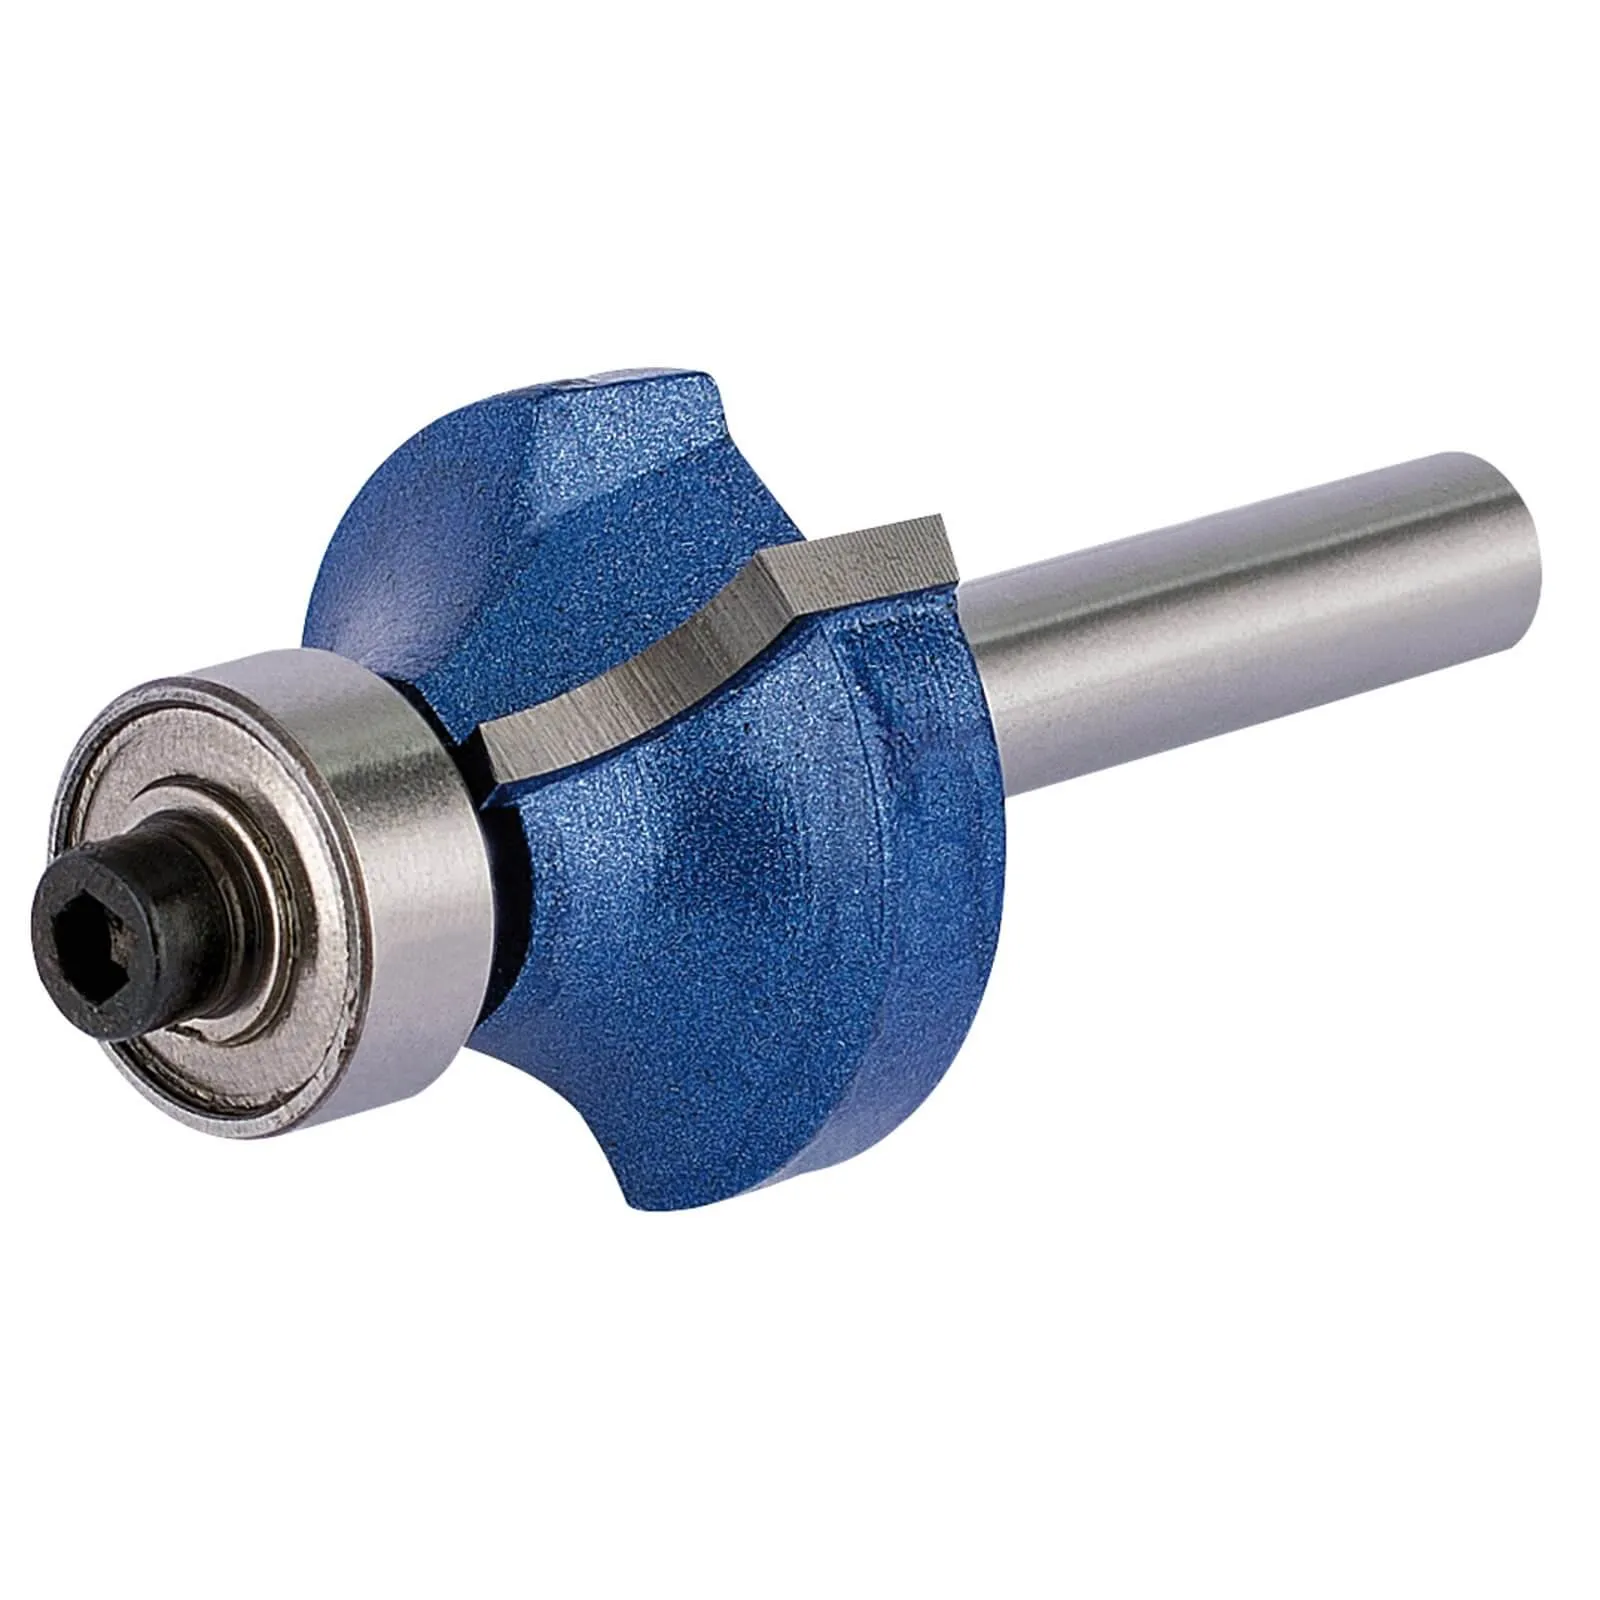 Draper Bearing Guided Rounding Over Router Cutter - 25mm, 7mm, 1/4"